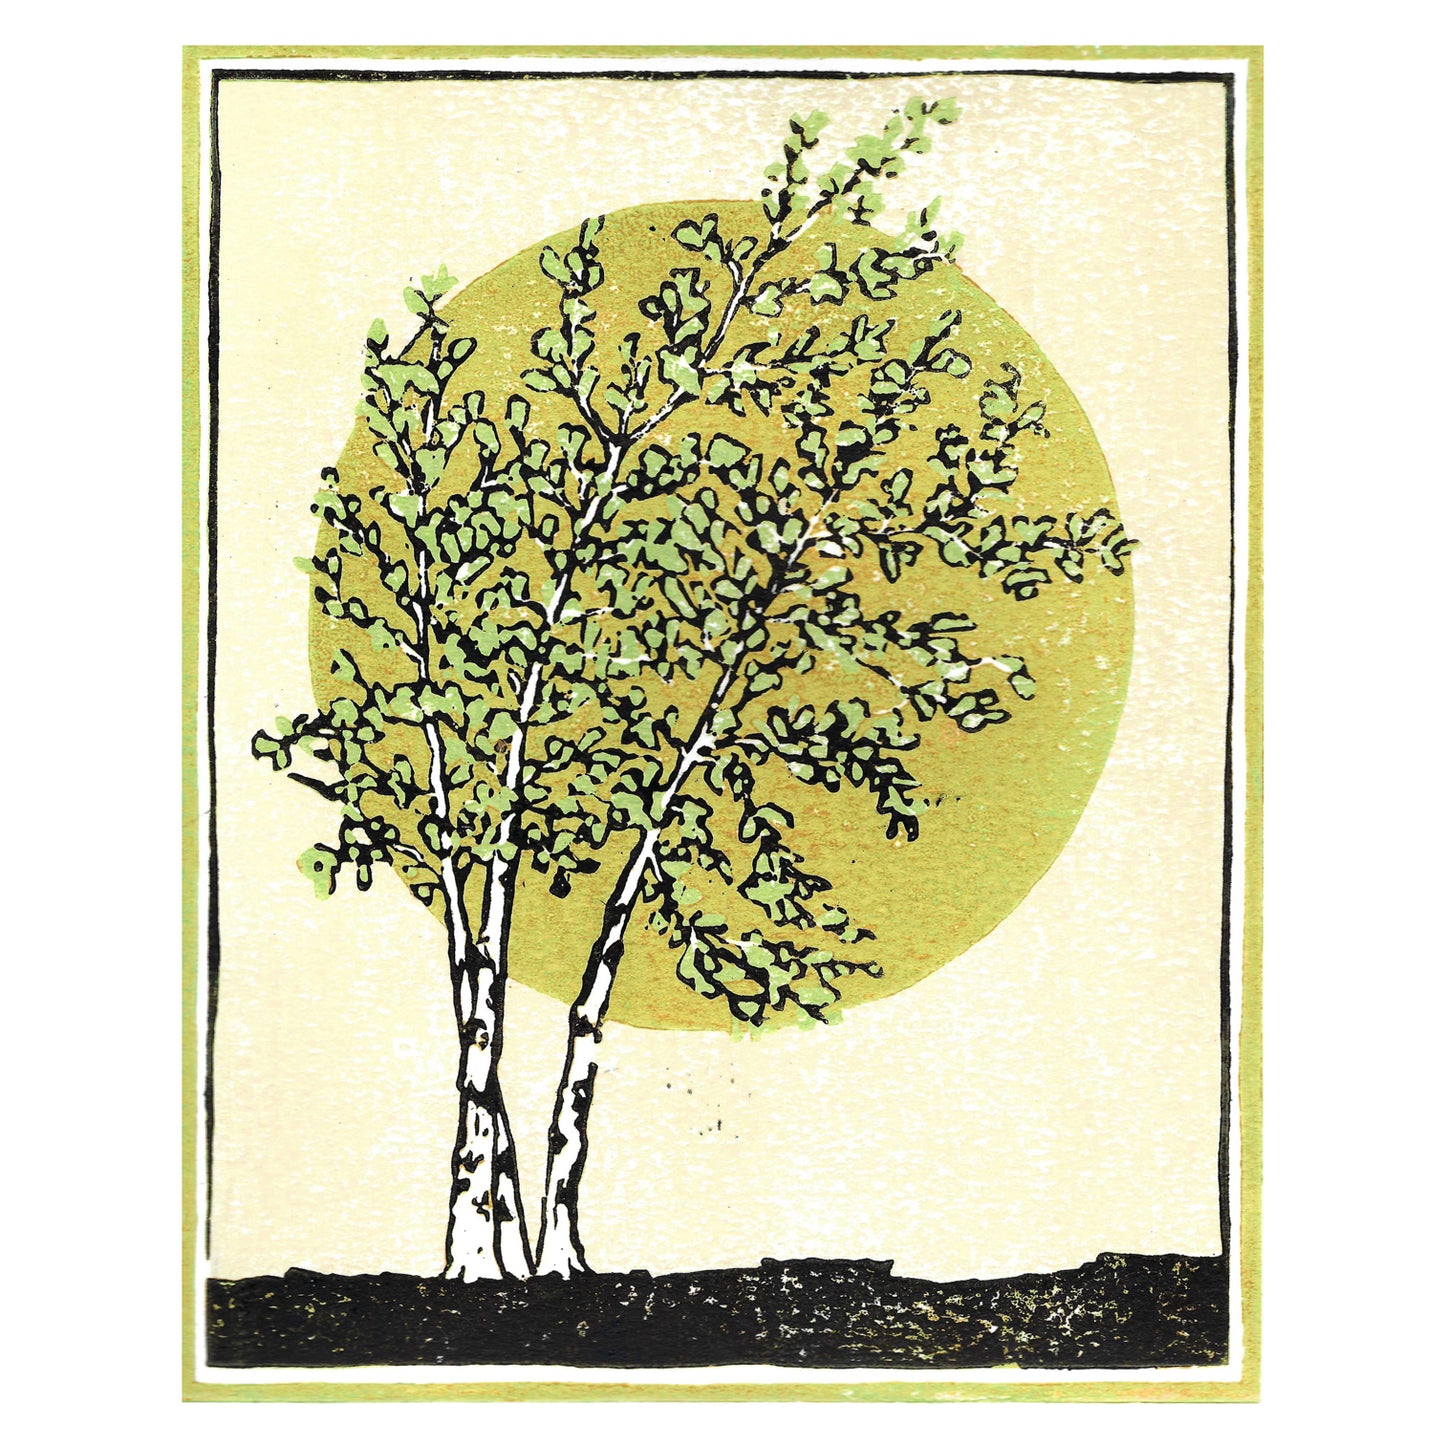 Birch tree art created by printmaker Natalia Wohletz of Peninsula Prints, Milford & Mackinac Island, Michigan. The original 4-color reduction block print design features a Paper Birch tree, which is native to Michigan, with the sun rising behind it.  